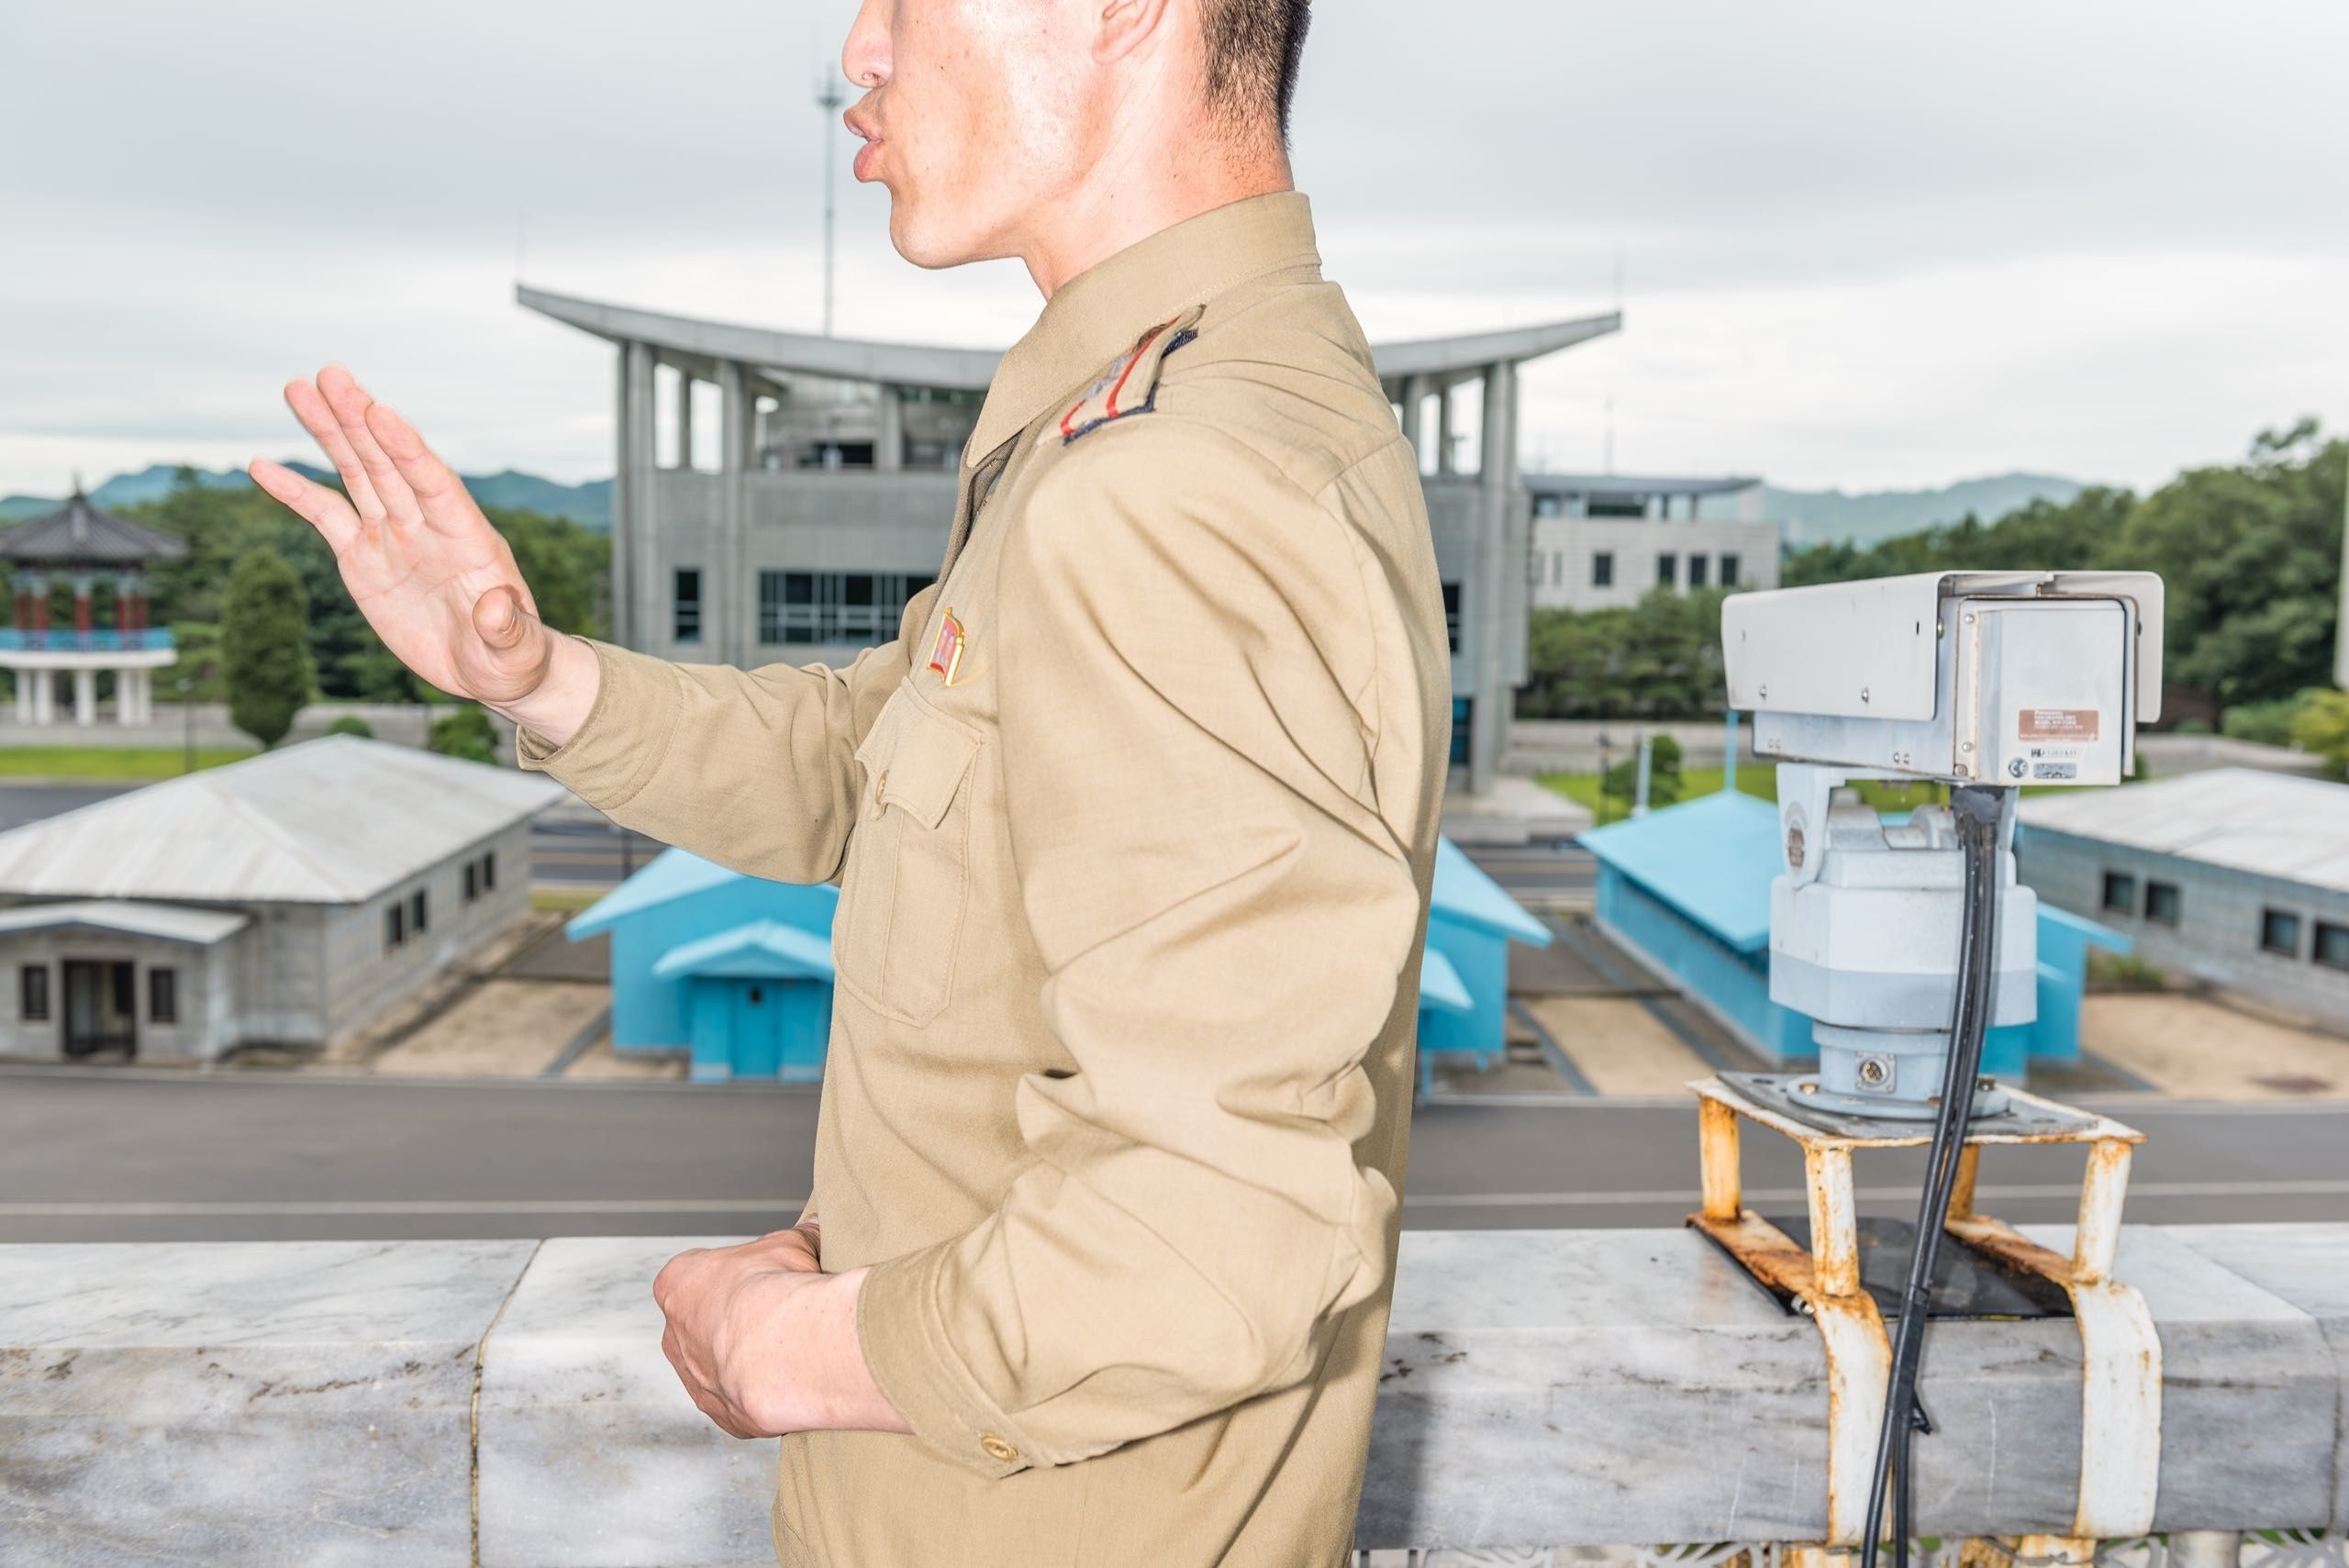 A military officer at the D.M.Z. This summer, the prospect of a nuclear confrontation between the United States and North Korea, the most hermetic power on the globe, entered a realm of psychological calculation reminiscent of the Cold War. Image by Max Pinckers/The New Yorker. North Korea, 2017.